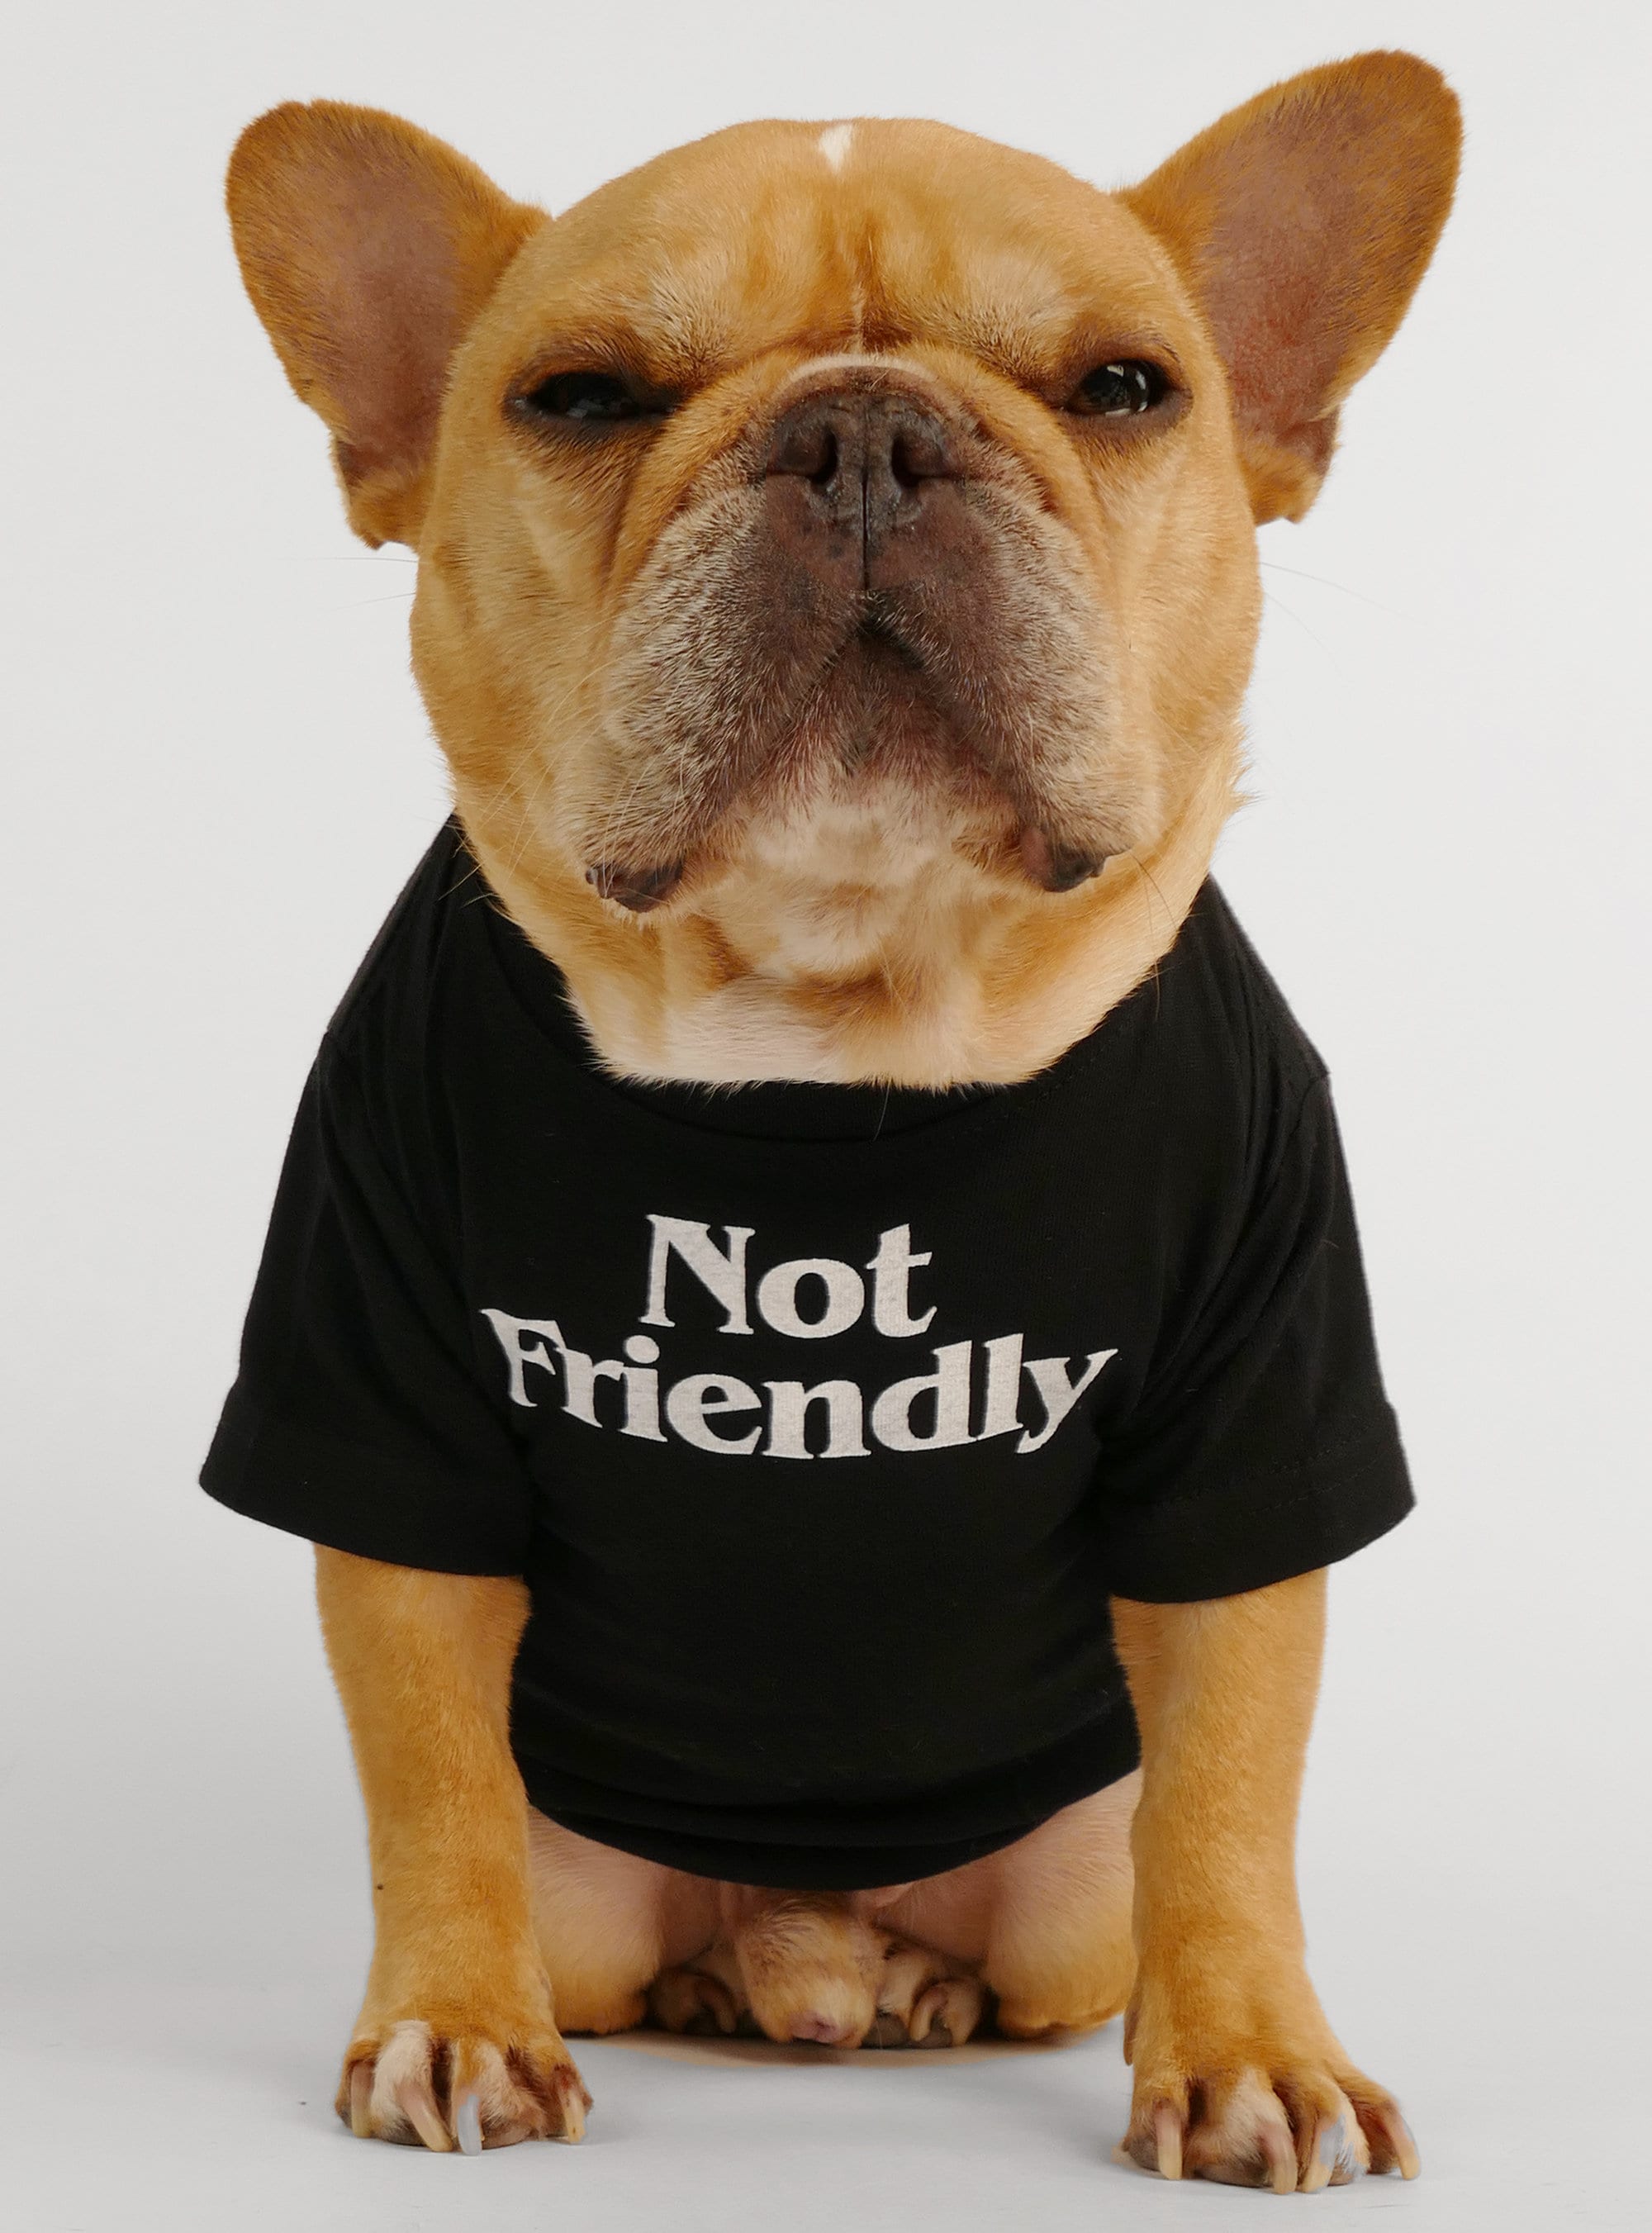 Discover Friendly + Not Friendly 2-Pack Dog Shirt Set - Favorite Funny Gift Dad Mom Frenchie French Bulldog Pug Puppy Pet Cat Dog Jumper Top T-Shirt